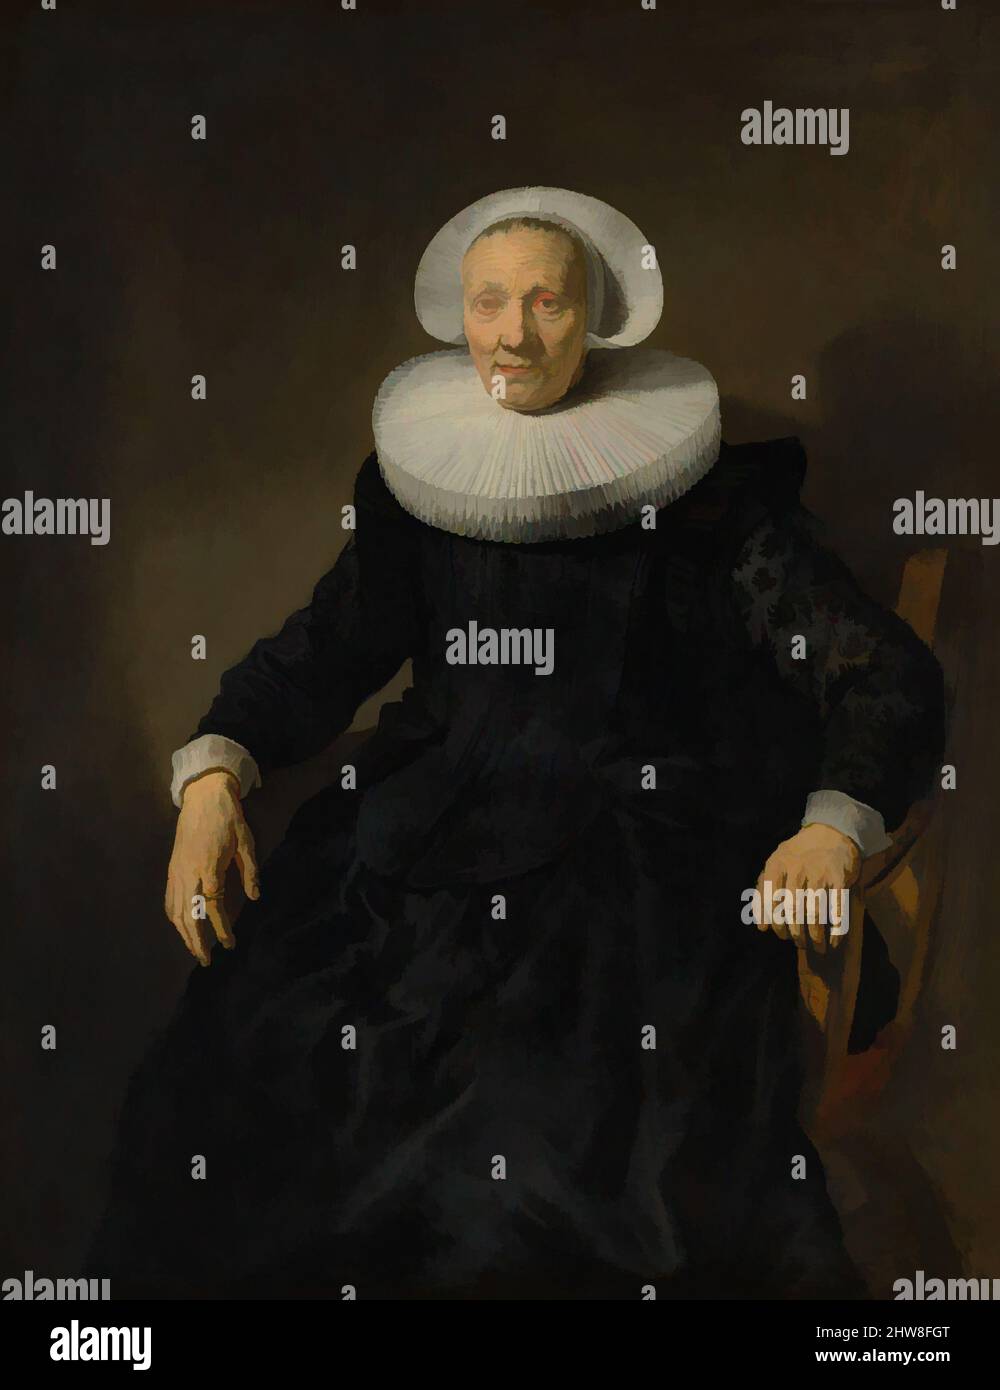 Art inspired by Old Woman in an Armchair, Oil on canvas, 50 3/8 x 39 1/8 in. (128 x 99.4 cm), Paintings, Attributed to Jacob Backer (Dutch, Harlingen 1608–1651 Amsterdam), This portrait is probably the companion piece to the Portrait of a Man in an Arm Chair, formerly in the Corcoran, Classic works modernized by Artotop with a splash of modernity. Shapes, color and value, eye-catching visual impact on art. Emotions through freedom of artworks in a contemporary way. A timeless message pursuing a wildly creative new direction. Artists turning to the digital medium and creating the Artotop NFT Stock Photo